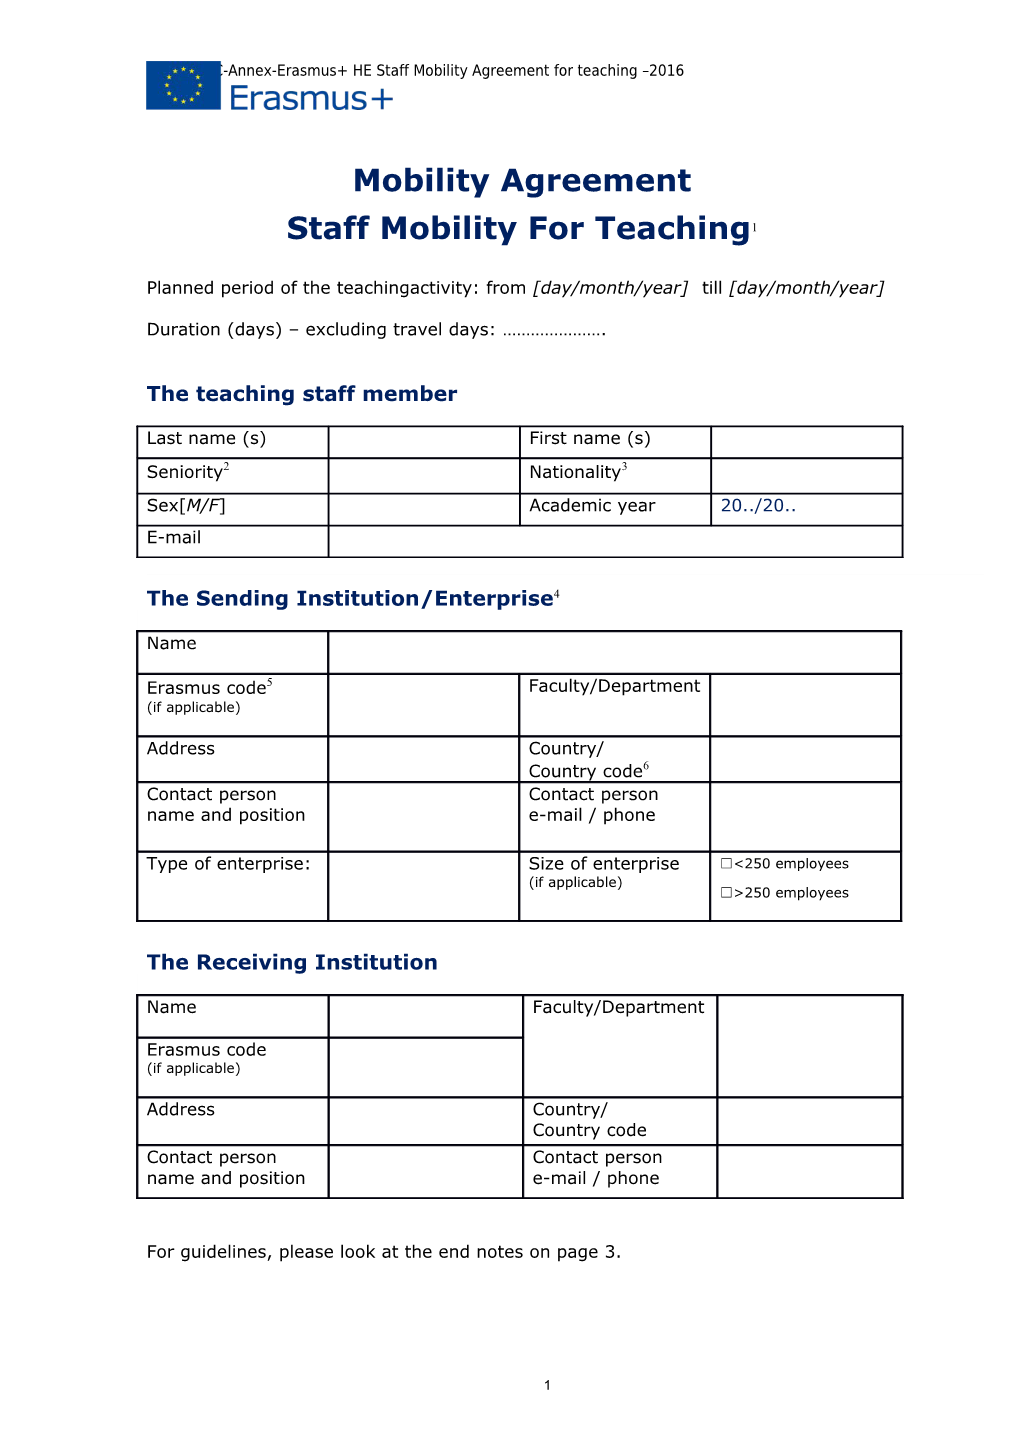 Gfna-II.7-C-Annex-Erasmus+ HE Staff Mobility Agreement for Teaching 2016